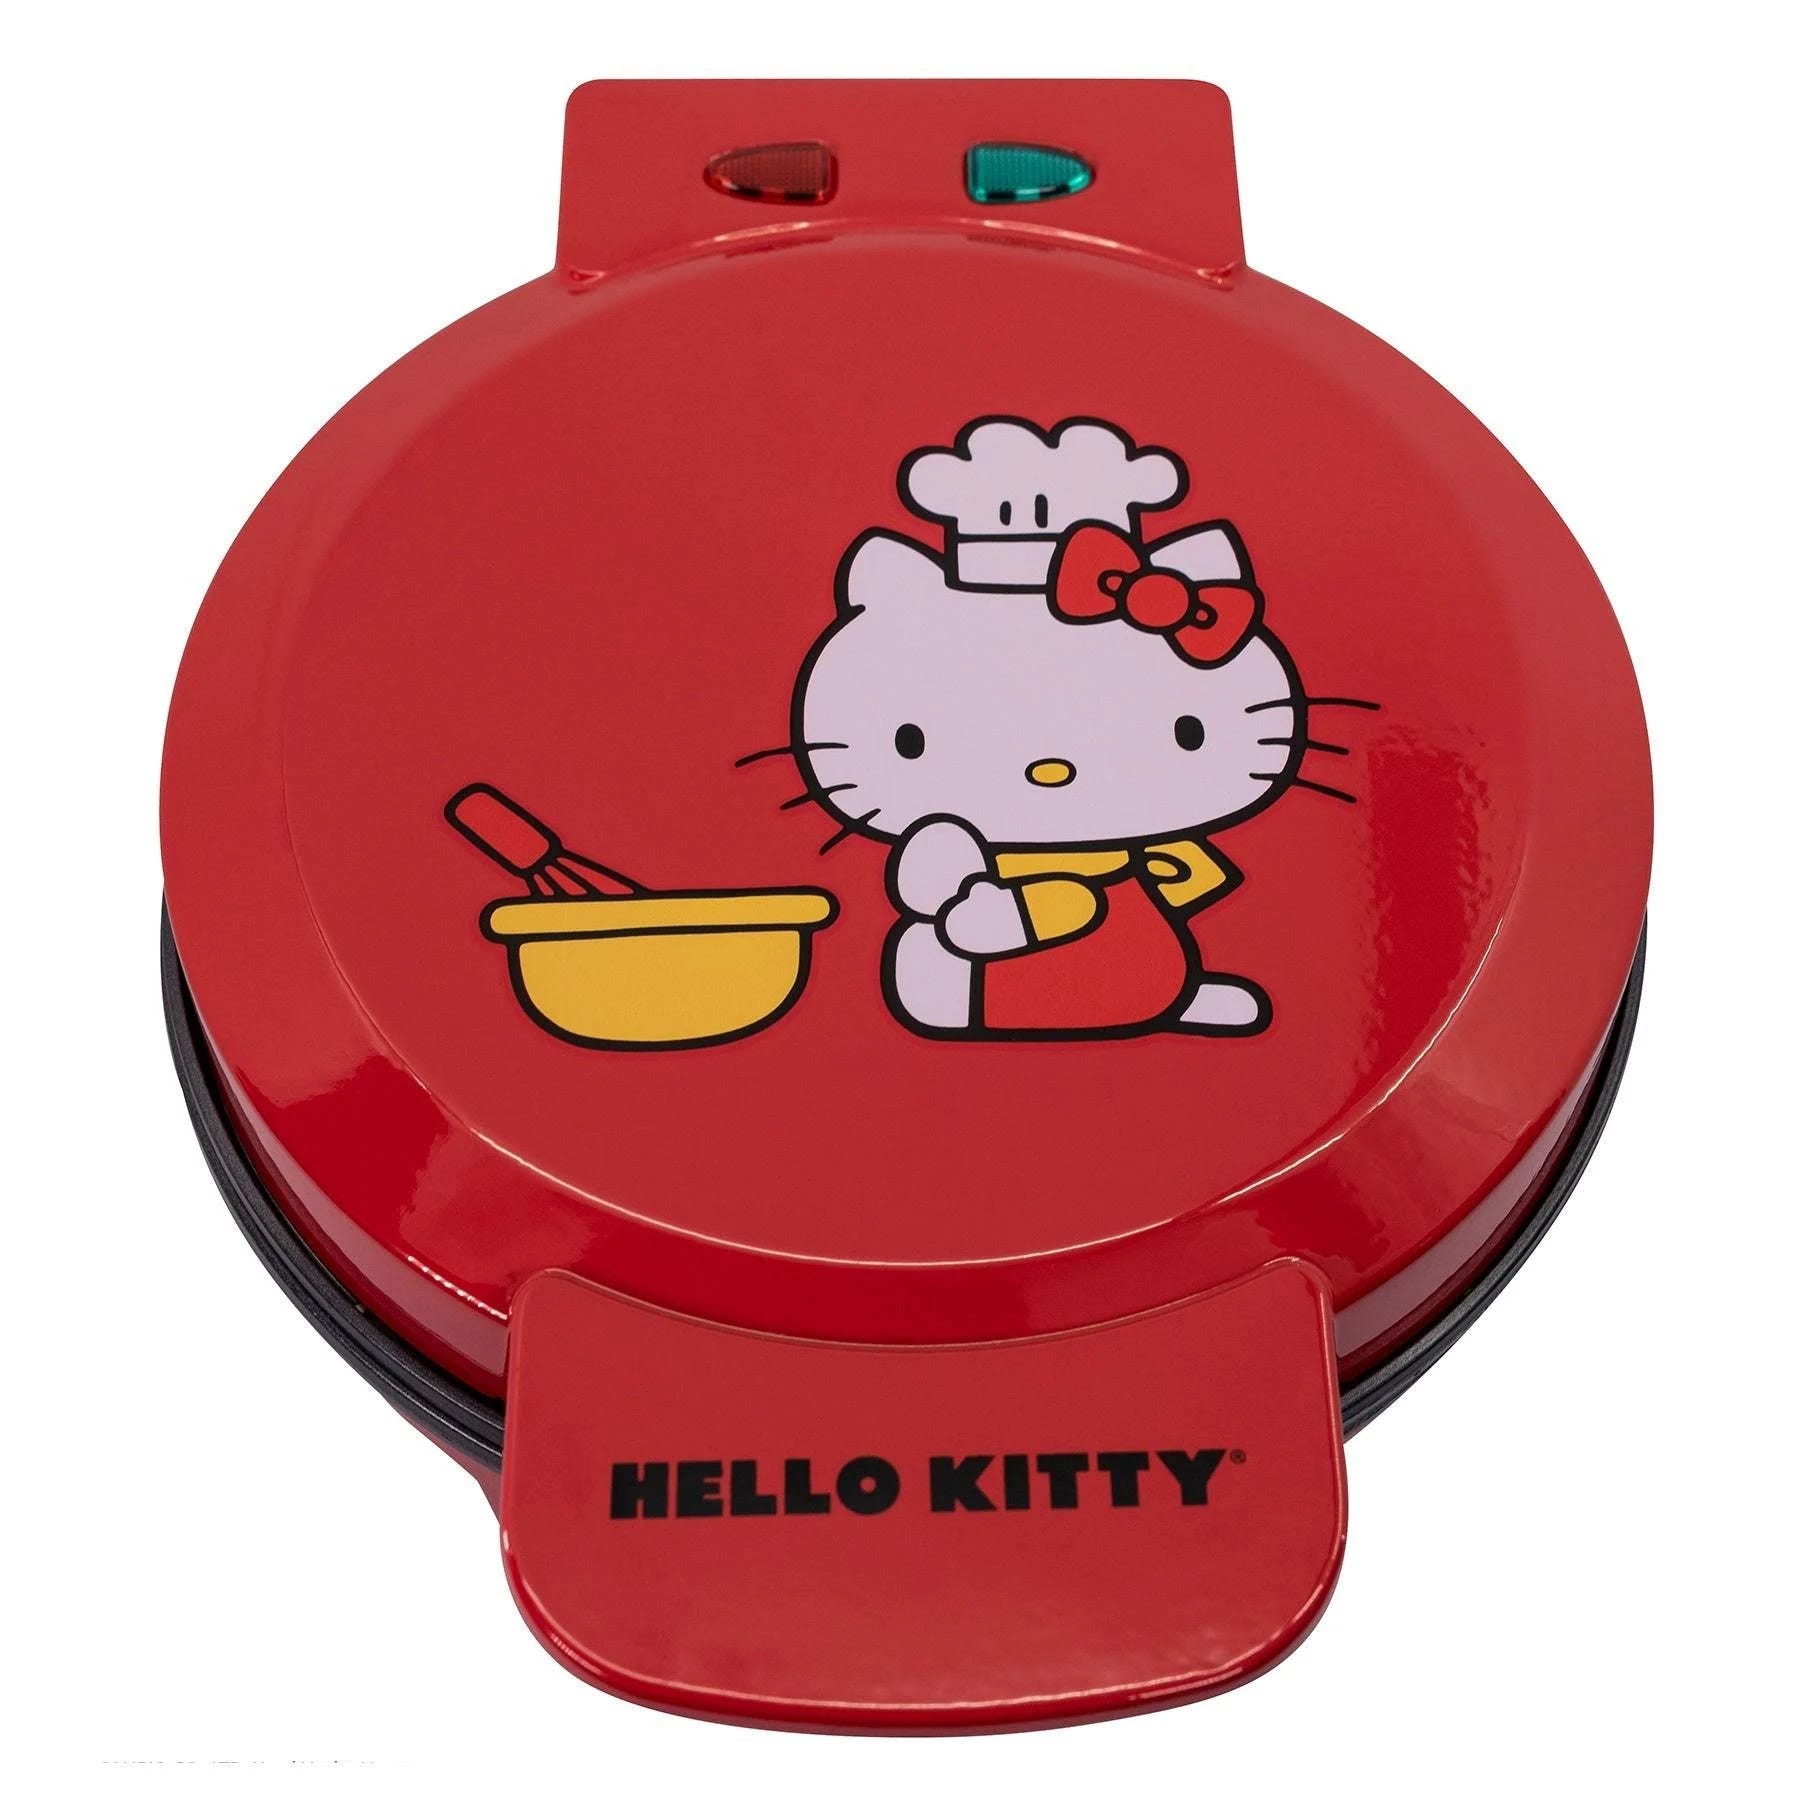 Hello Kitty Red Waffle Maker: Fun Kitchen Decor and Pop Culture Inspiration for Eggs and More | Image